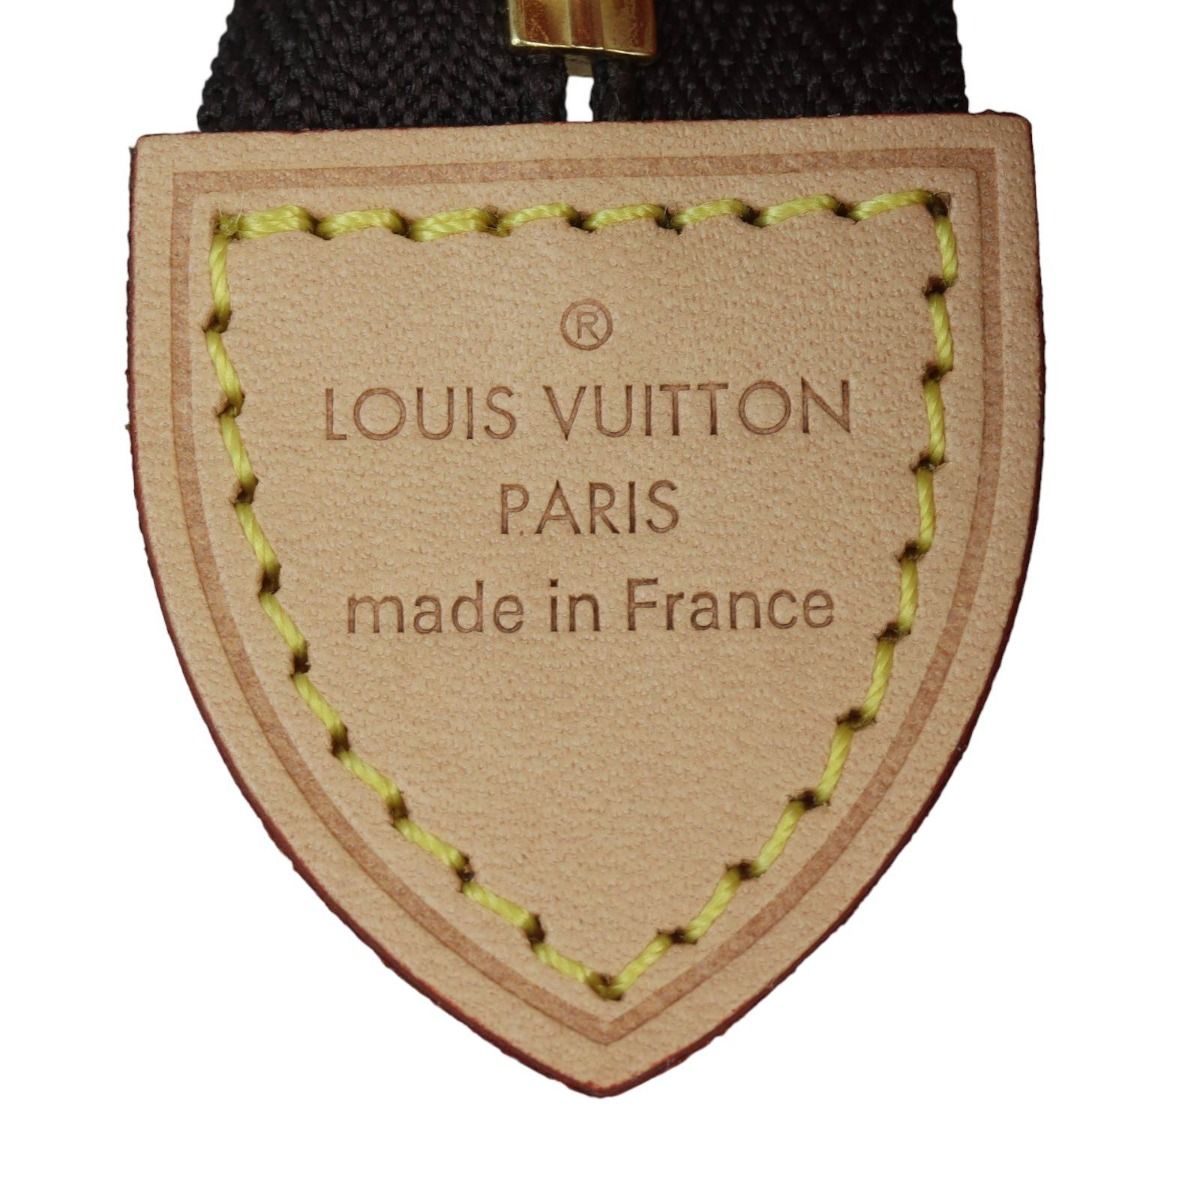 Leather Top Handle Bag Strap - For Louis Vuitton, Chanel, Gucci – Luxegarde